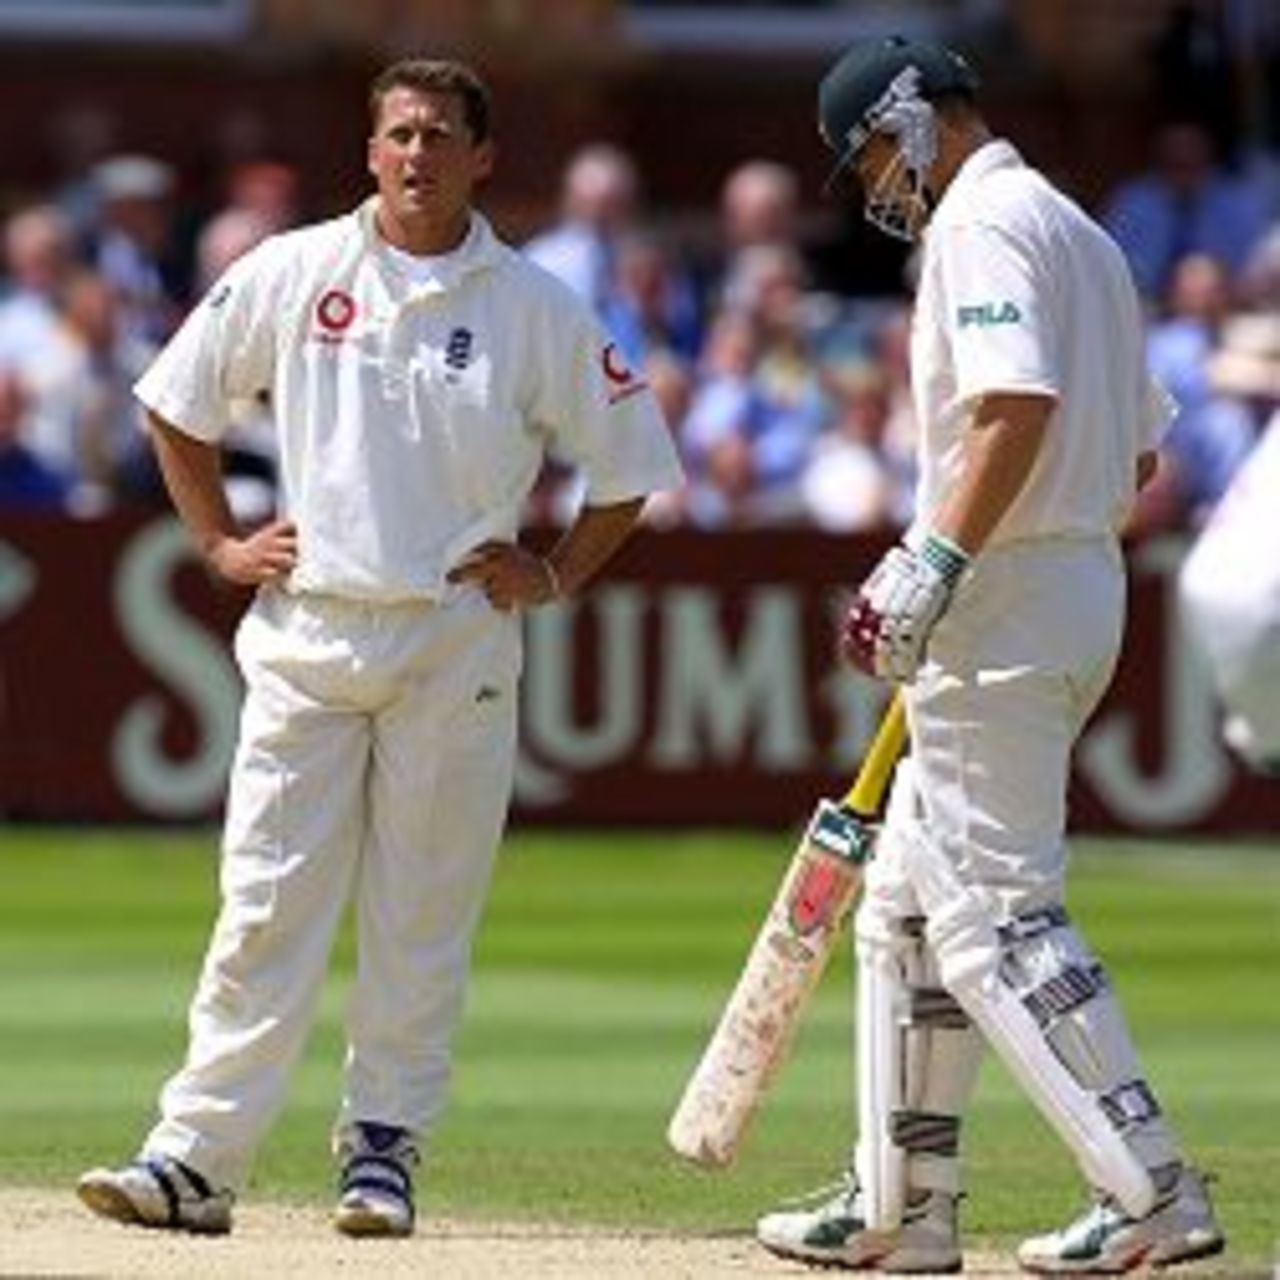 21 Jul 2001: A dejected Darren Gough of England as he sees Adam Gilchrist of Australia drop again during the third day of the Second Npower Test between Engalnd and Australia at Lord's, London.